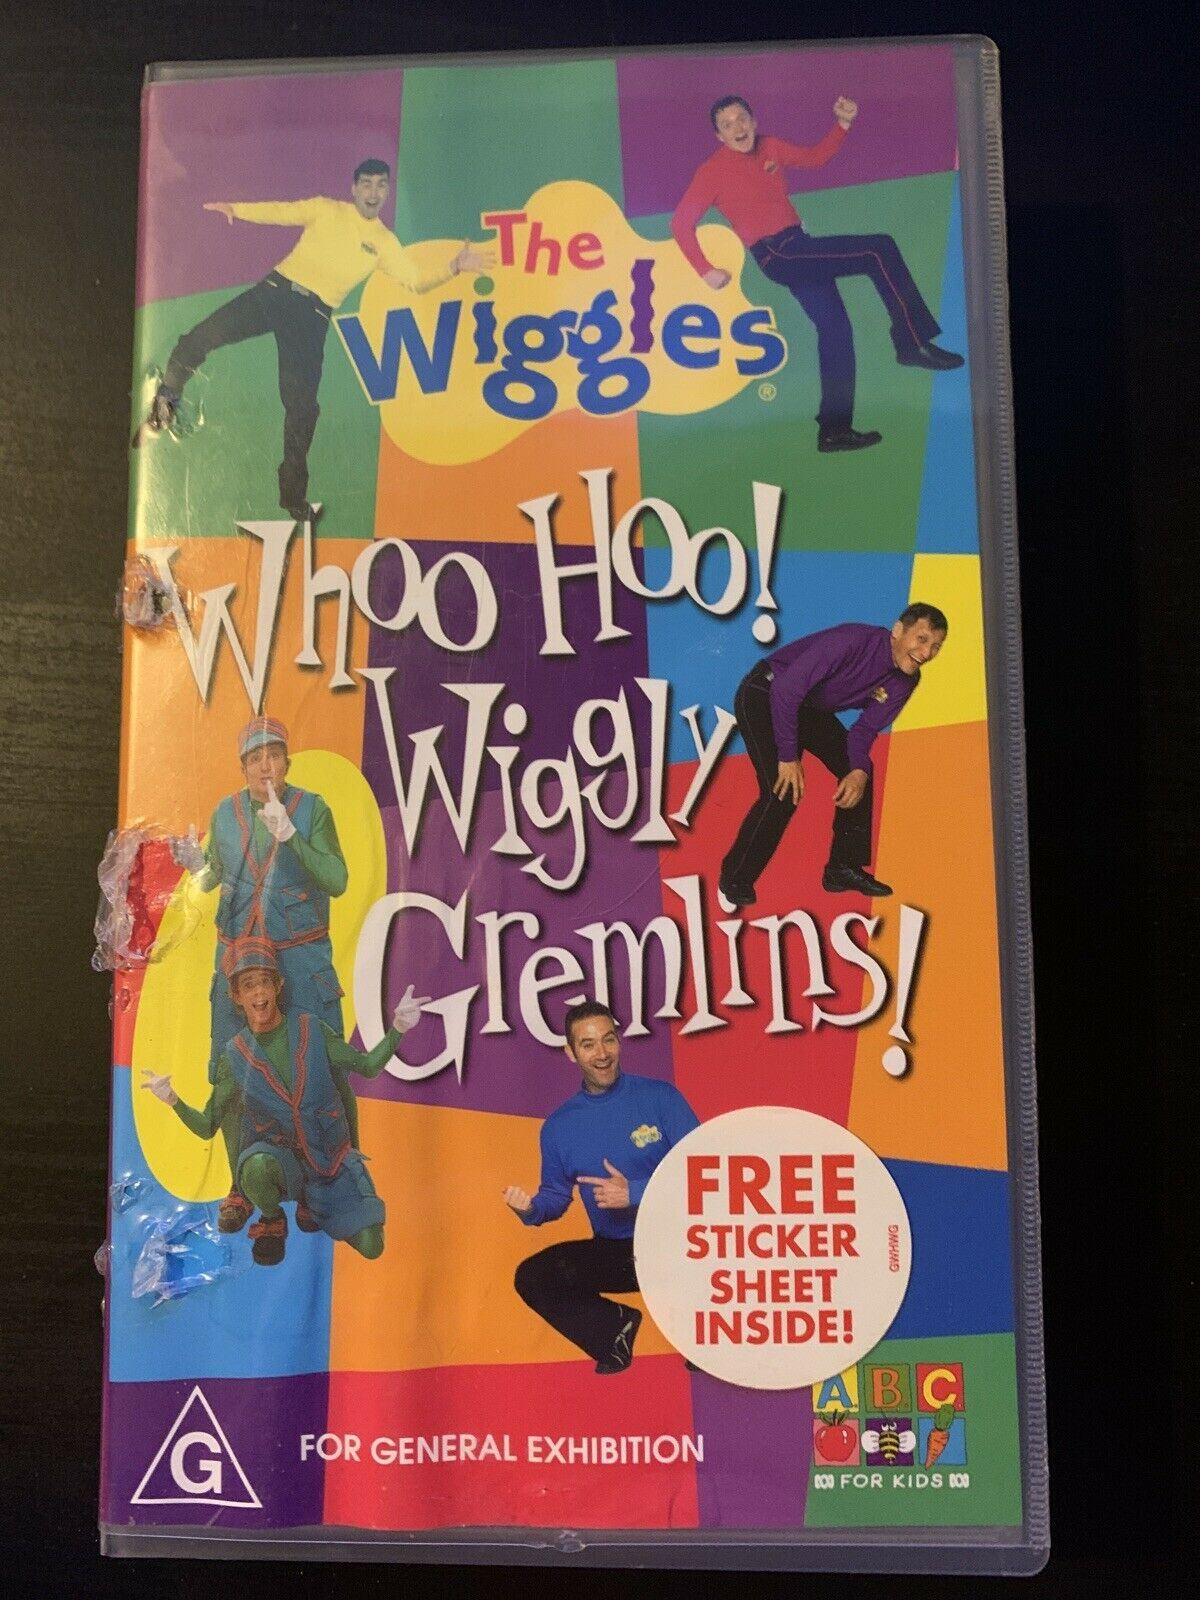 The Wiggles - Whoo Hoo! Wiggly Gremlins! (VHS, 2003) PAL